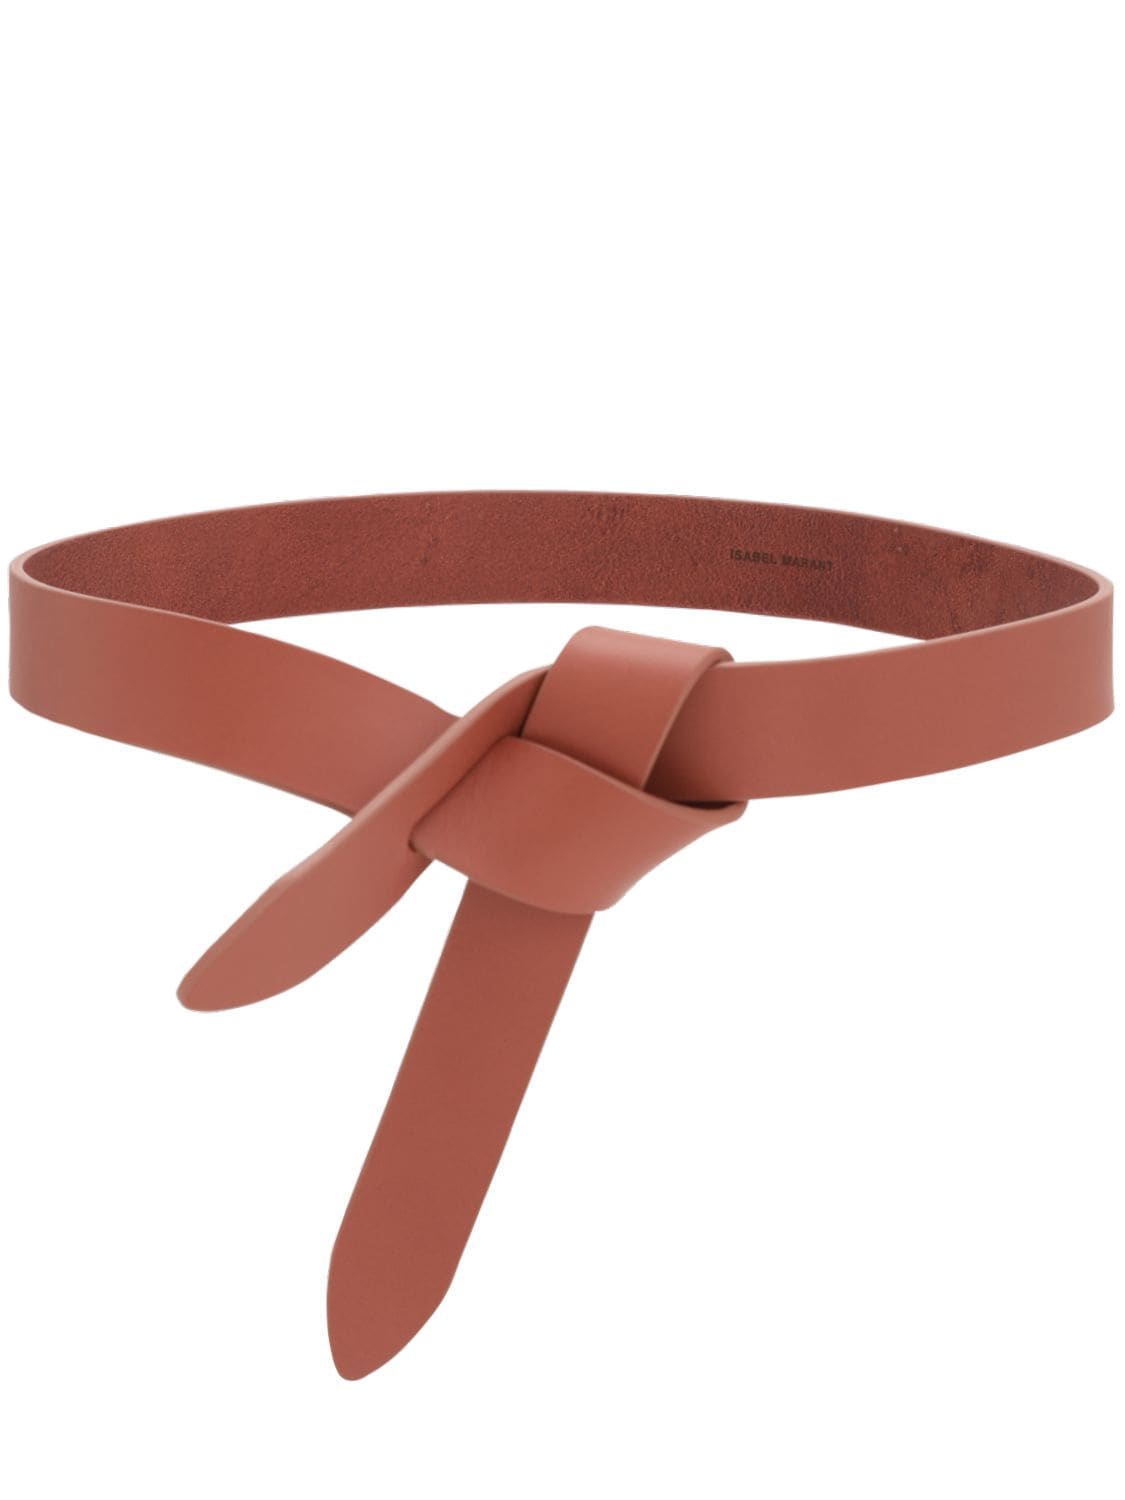 Isabel Marant 30mm Lecce Leather Belt W/bow In Rosewood | ModeSens